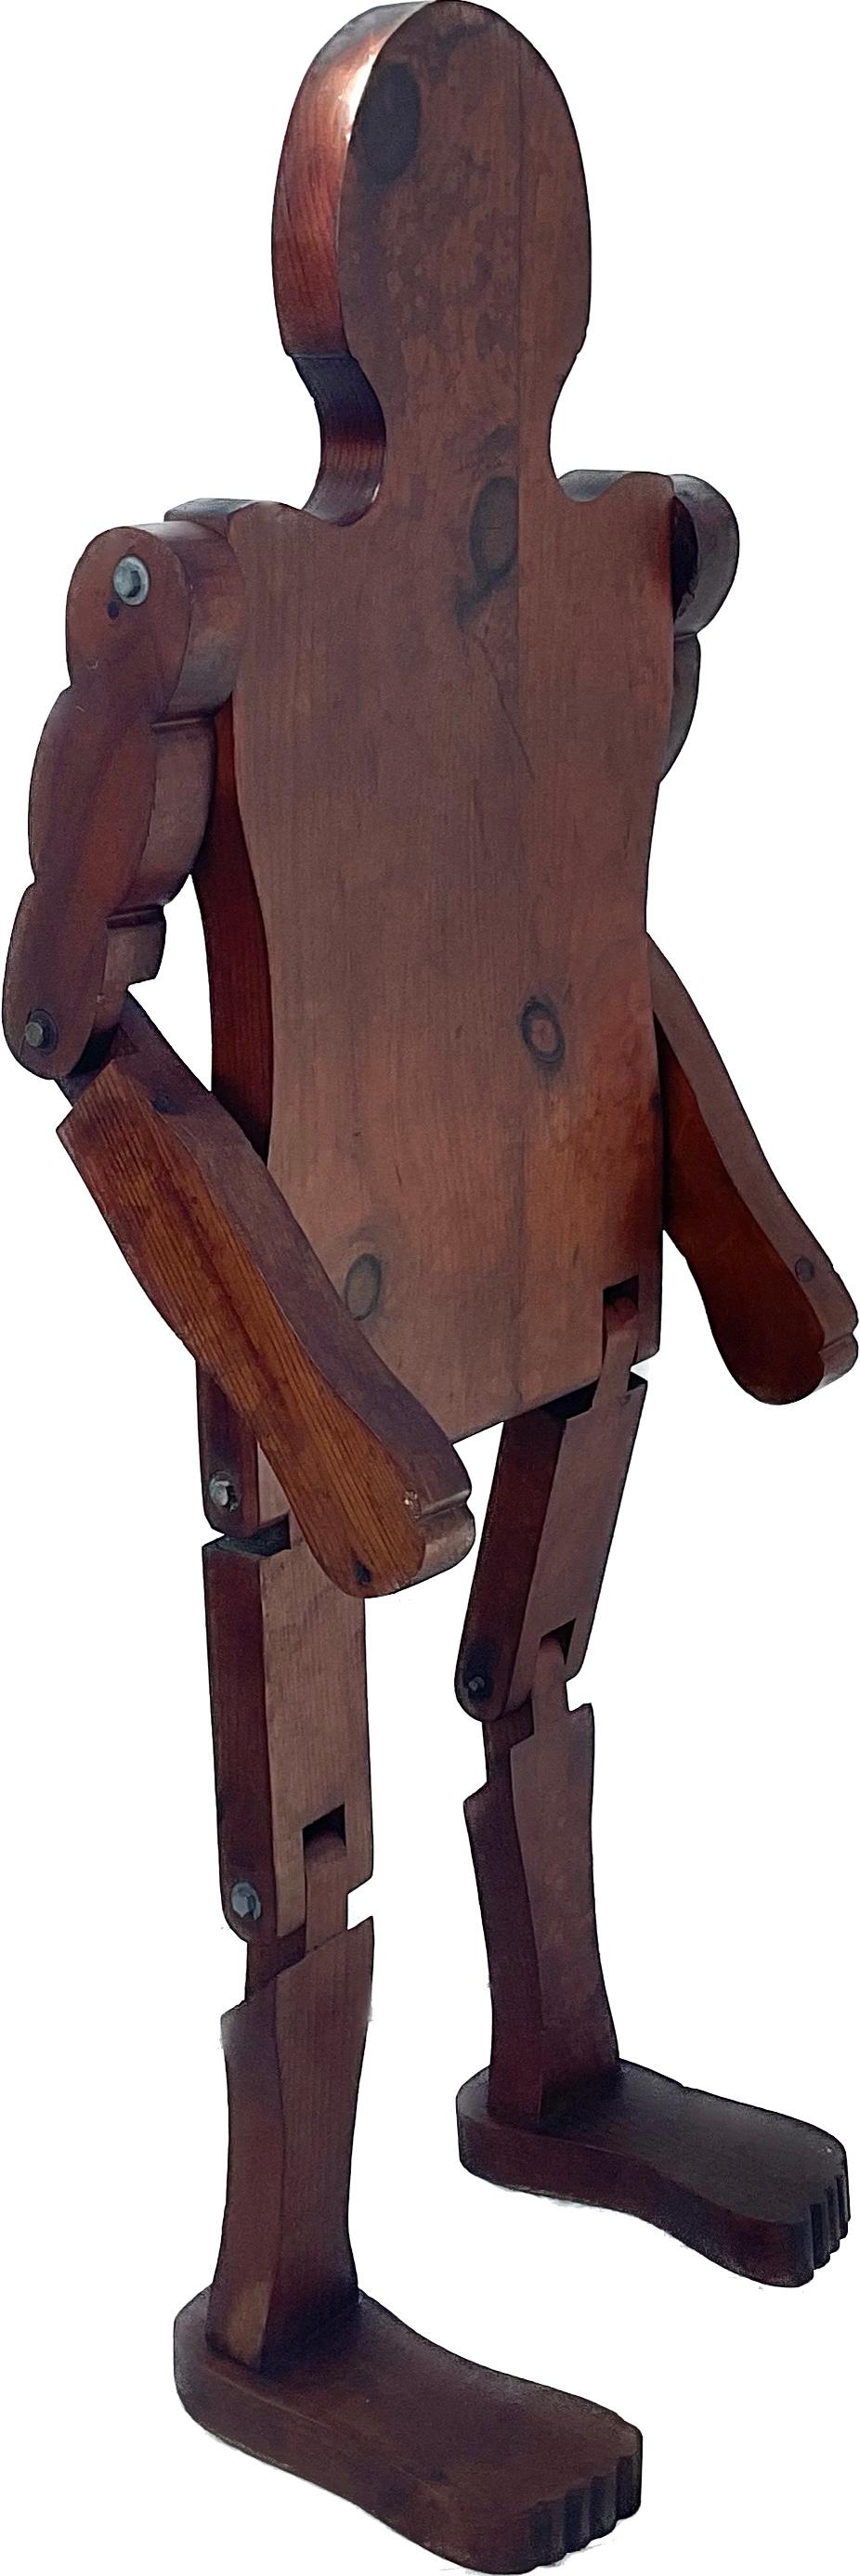 20th Century Folk Art Child-Size Articulated Wooden Mannequin For Sale